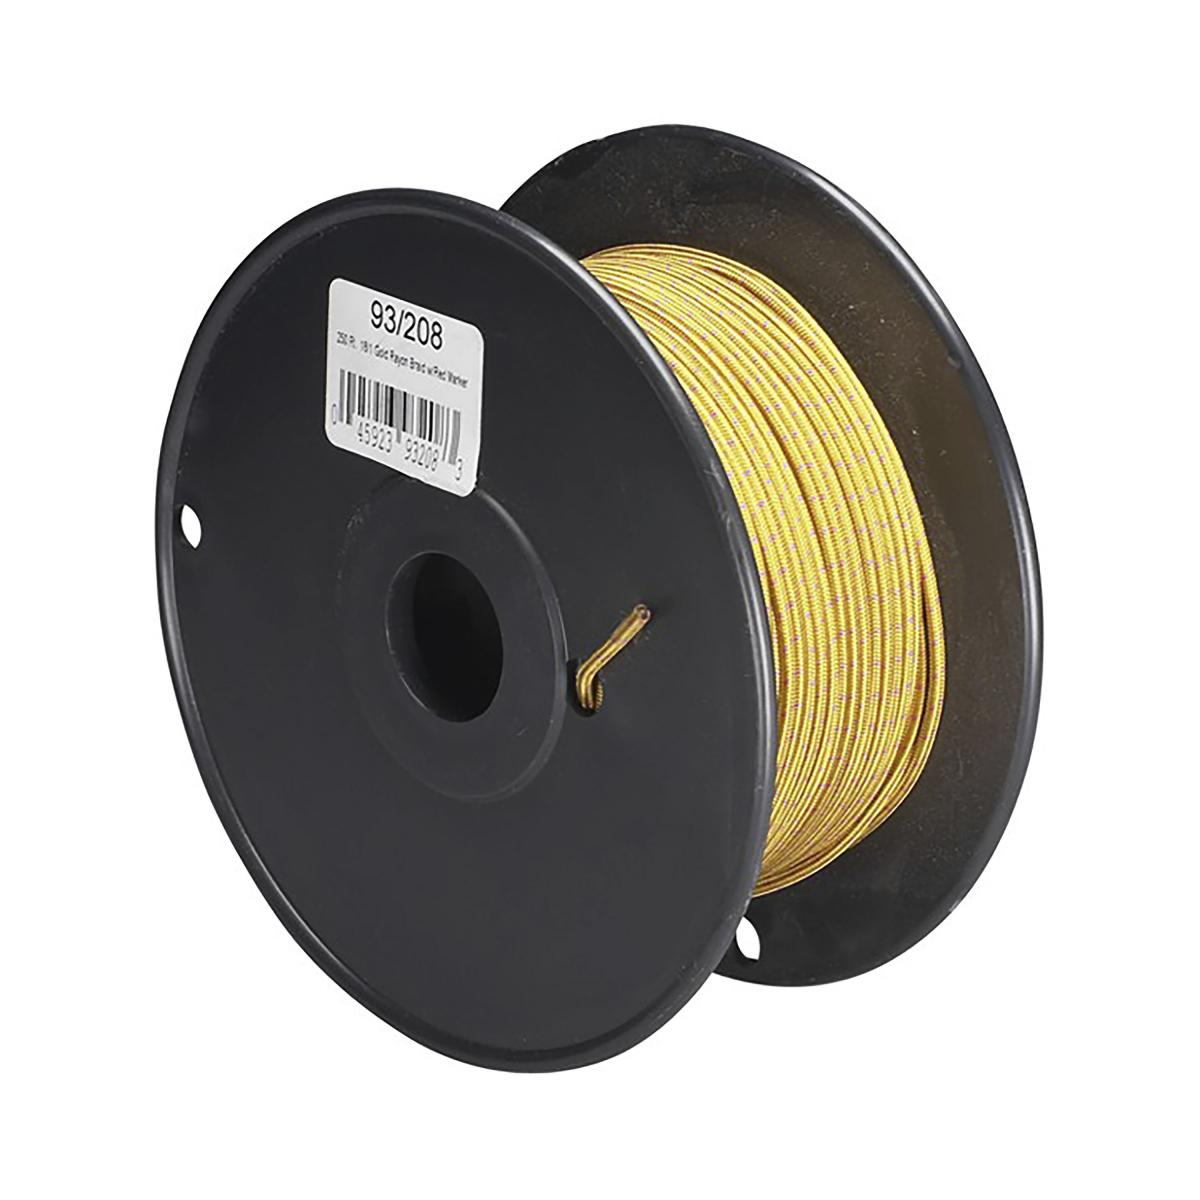 Satco 93-208 Pulley Bulk Wire 18/1 Rayon Braid 90C 250 Foot/Spool Gold With Red Marker